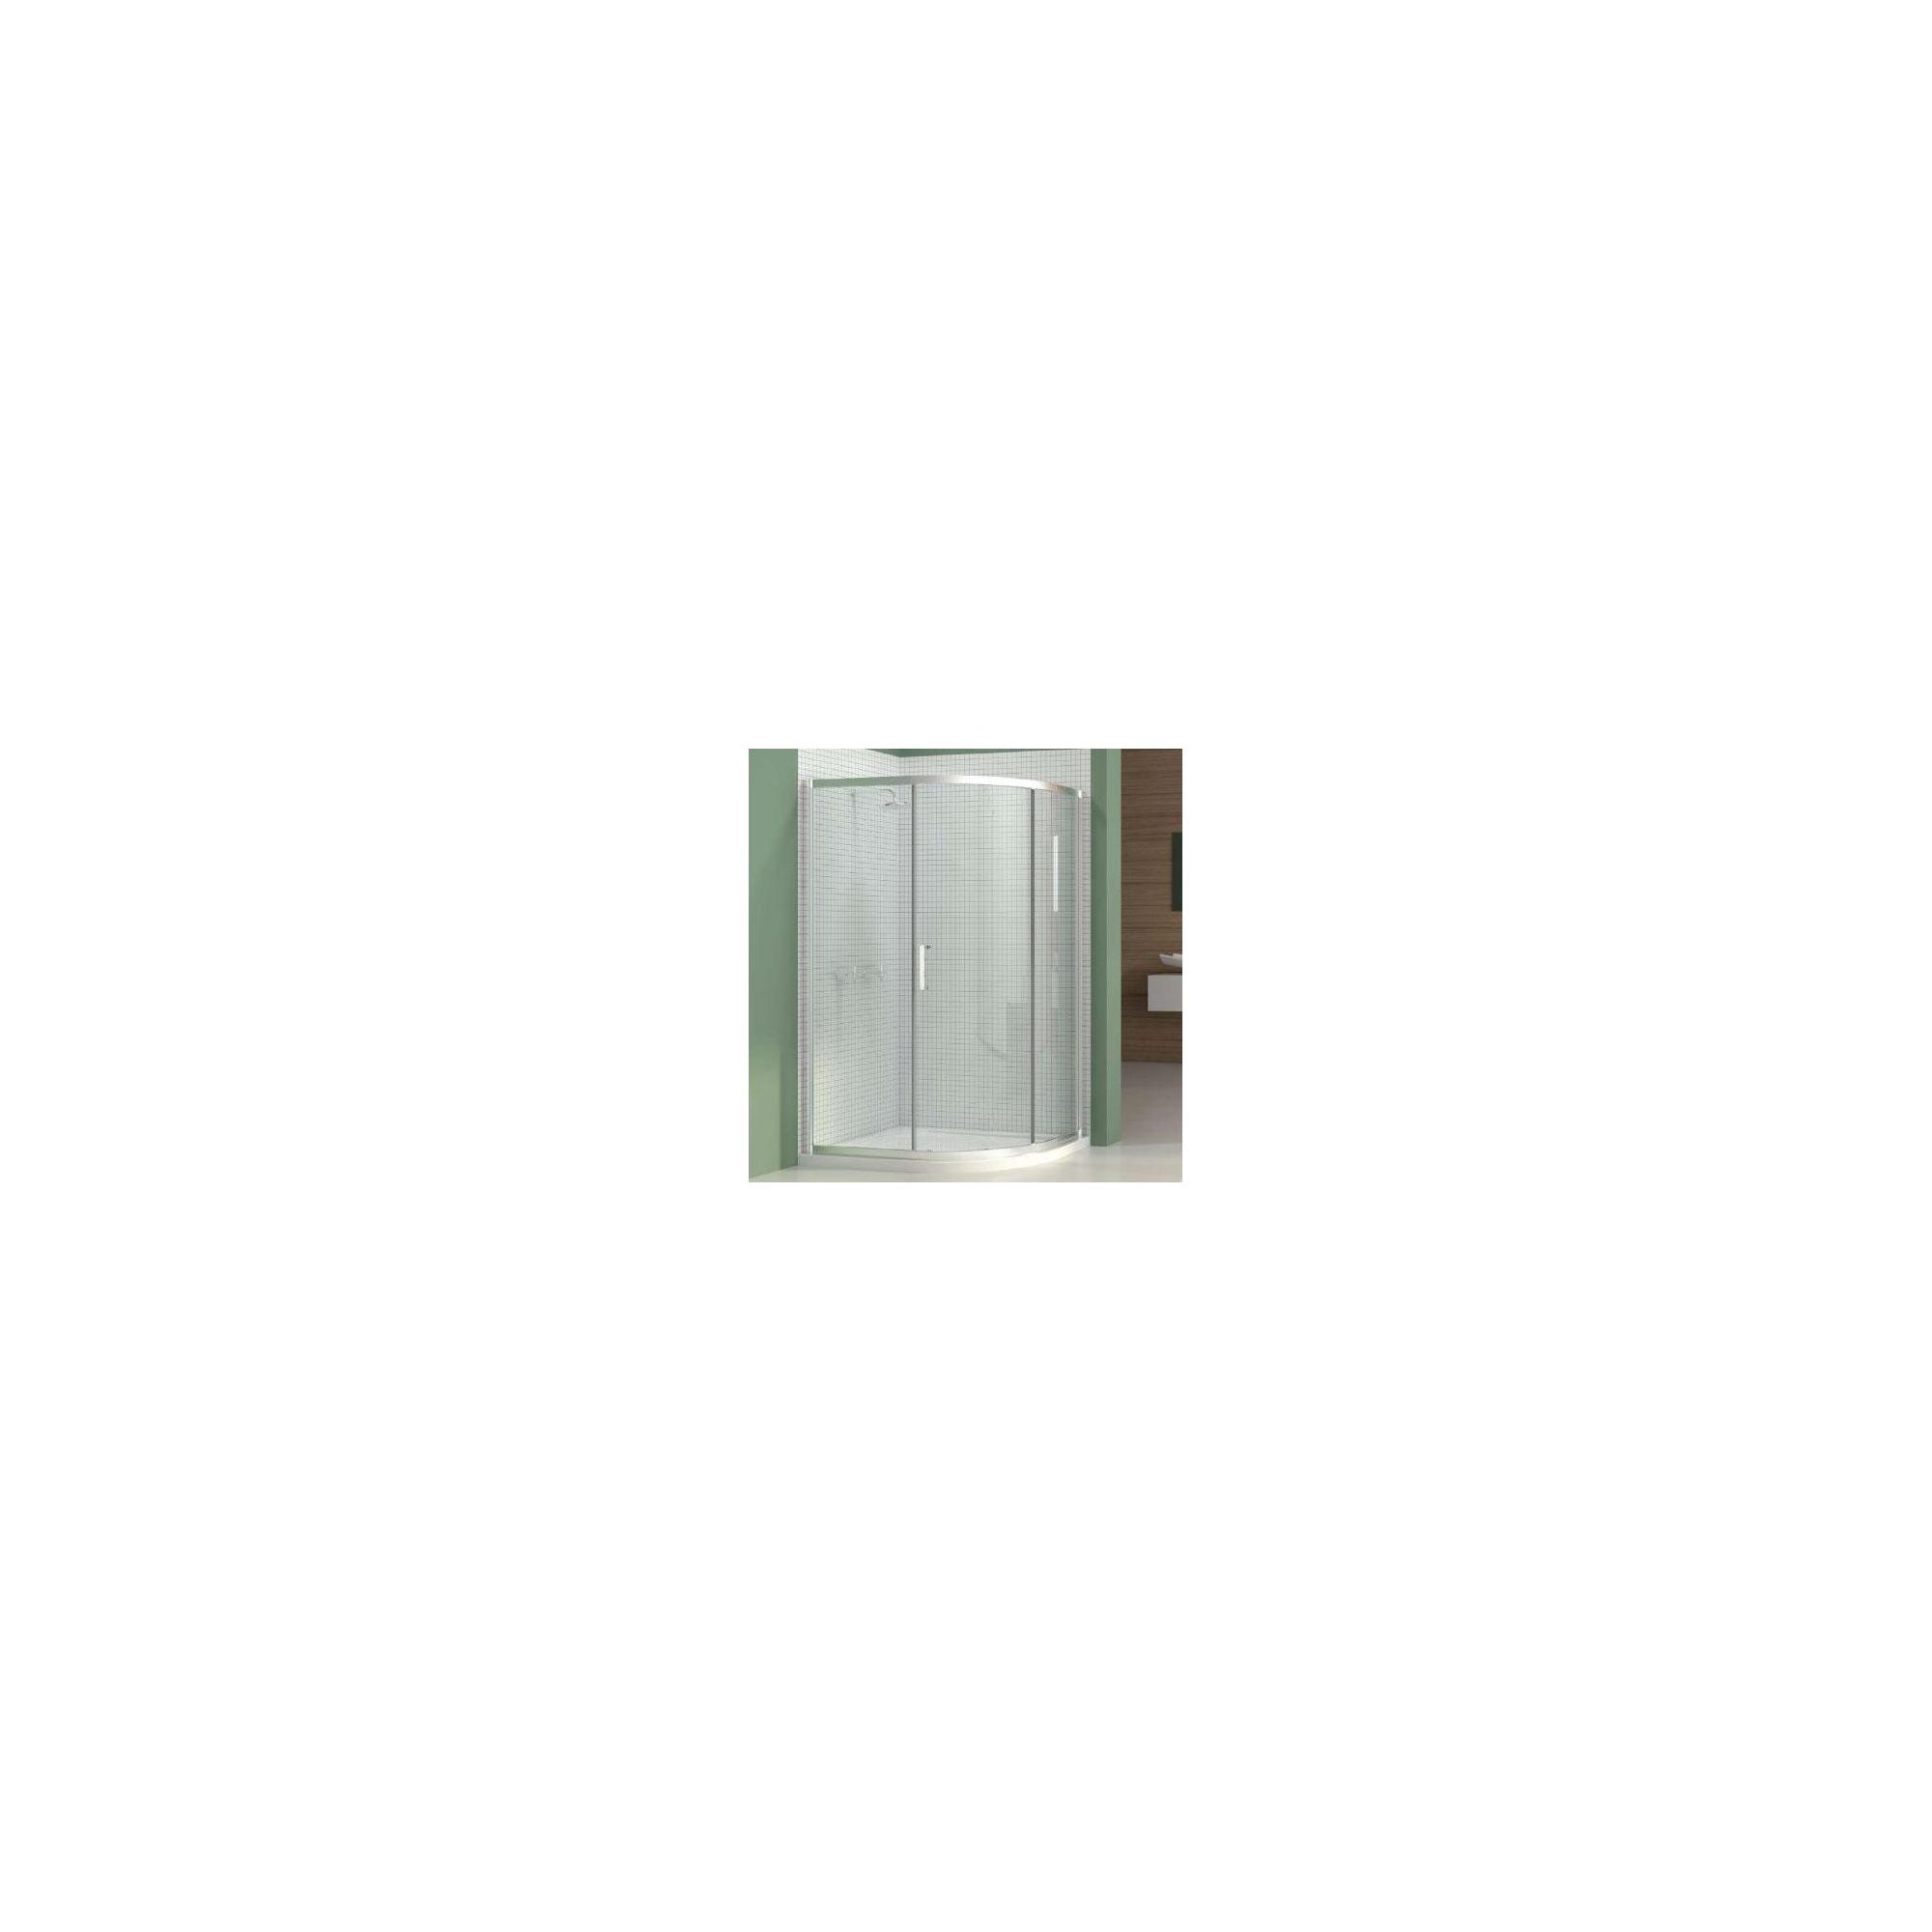 Merlyn Vivid Six Offset Quadrant Shower Enclosure, 900mm x 760mm, Right Handed, Low Profile Tray, 6mm Glass at Tesco Direct